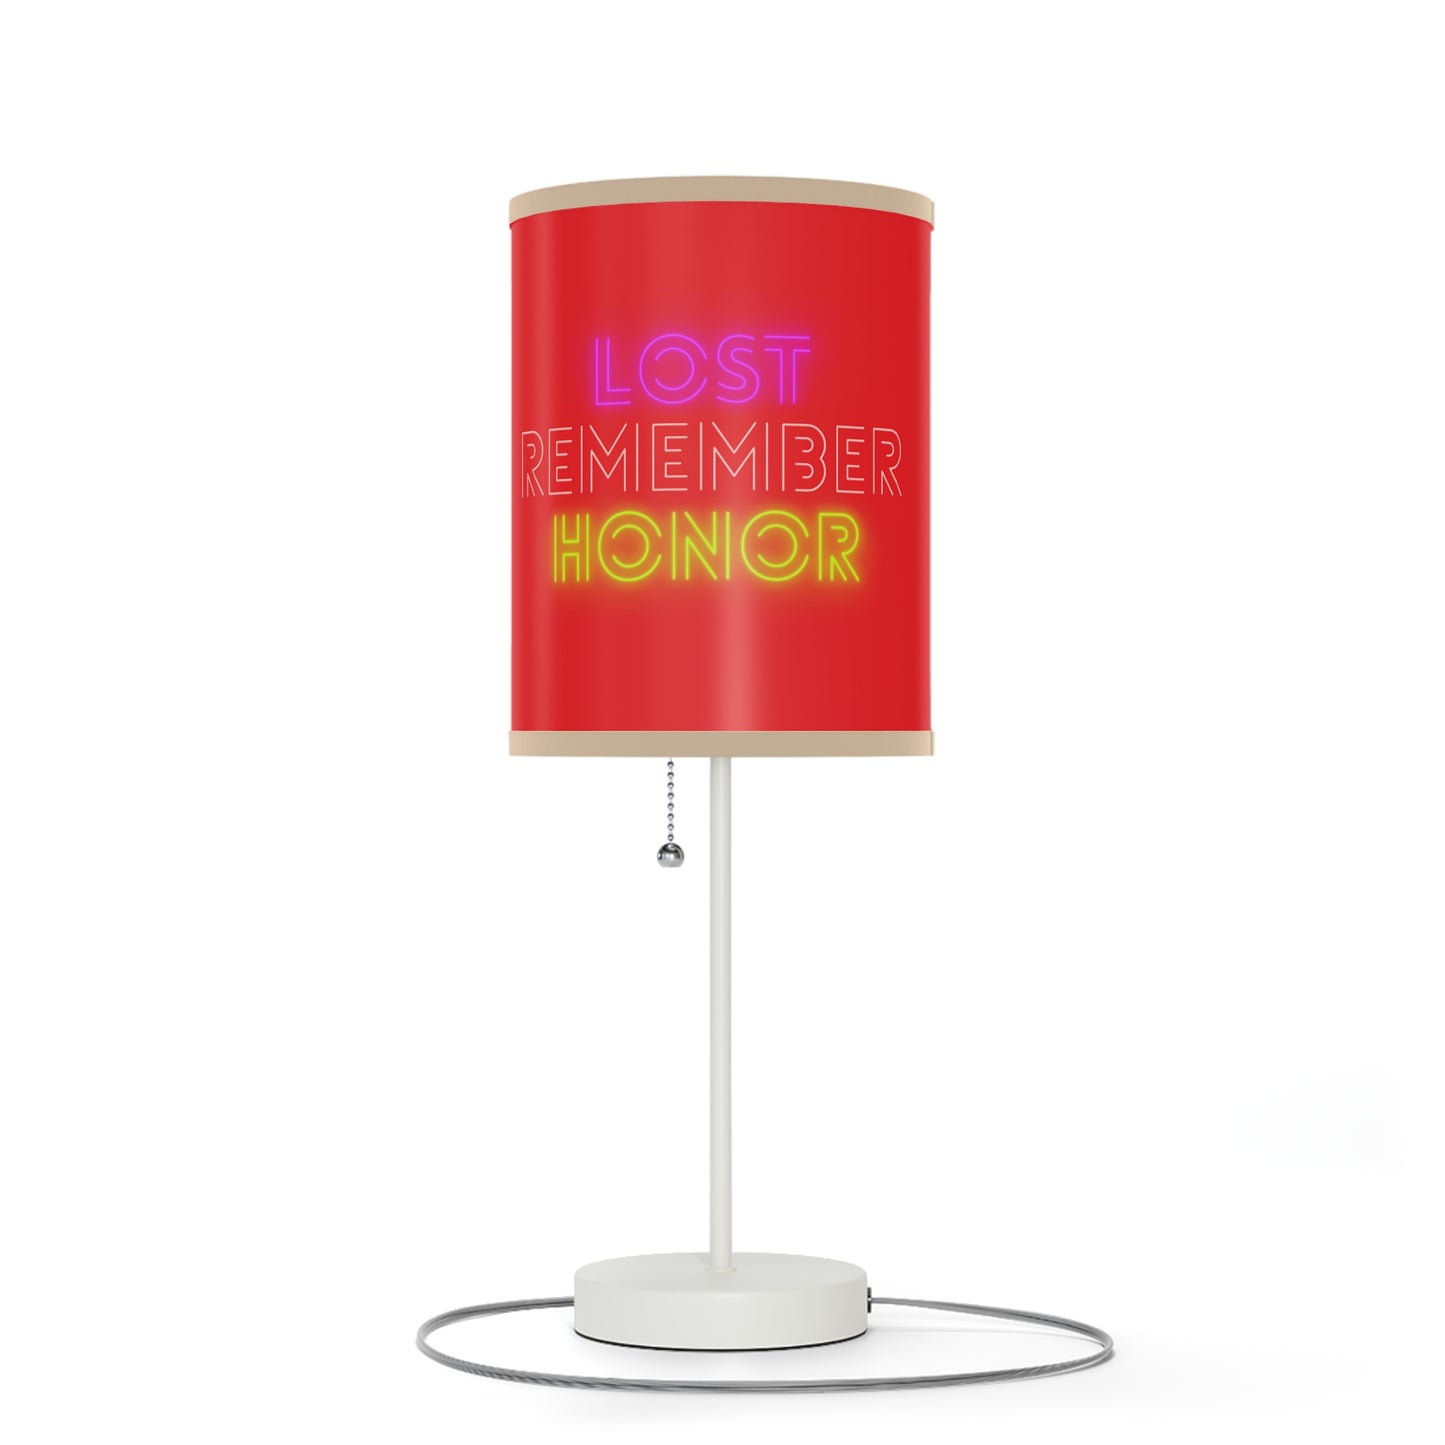 Lamp on a Stand, US|CA plug: Gaming Red